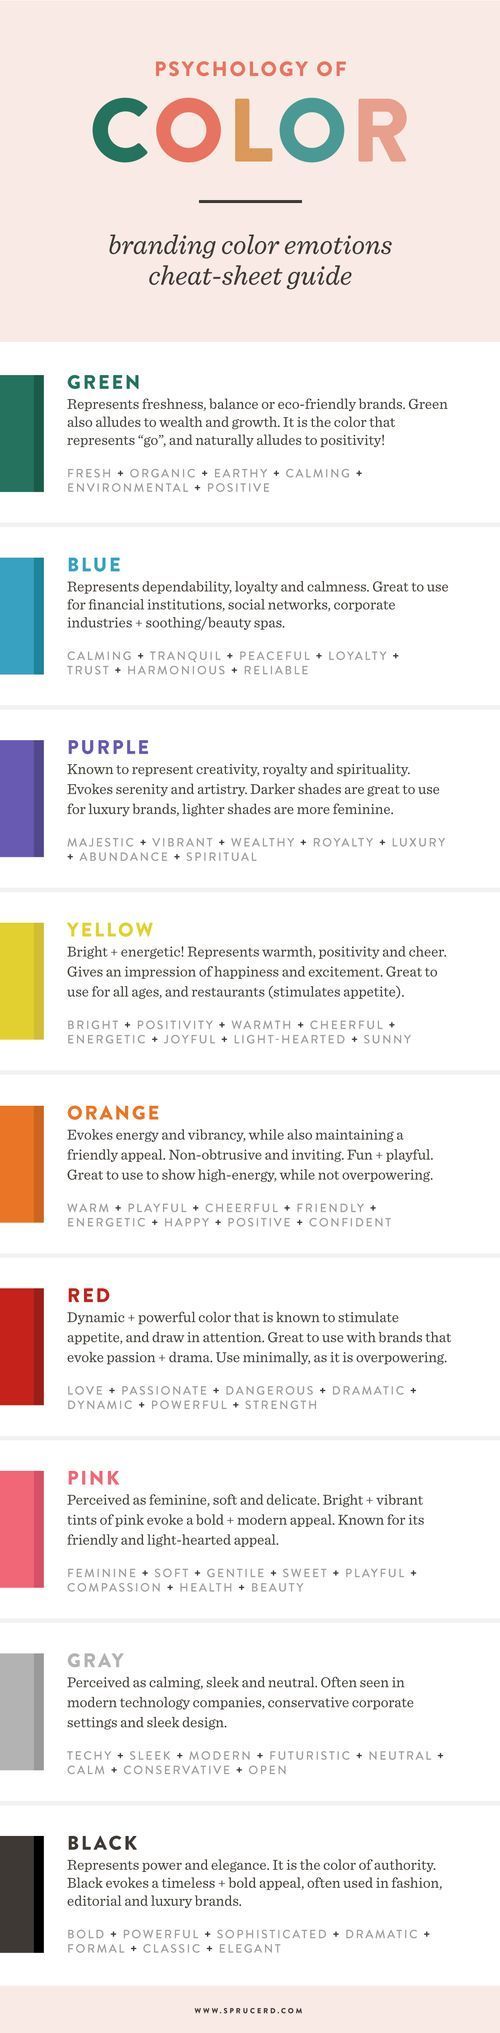 Psychology of color for your brand